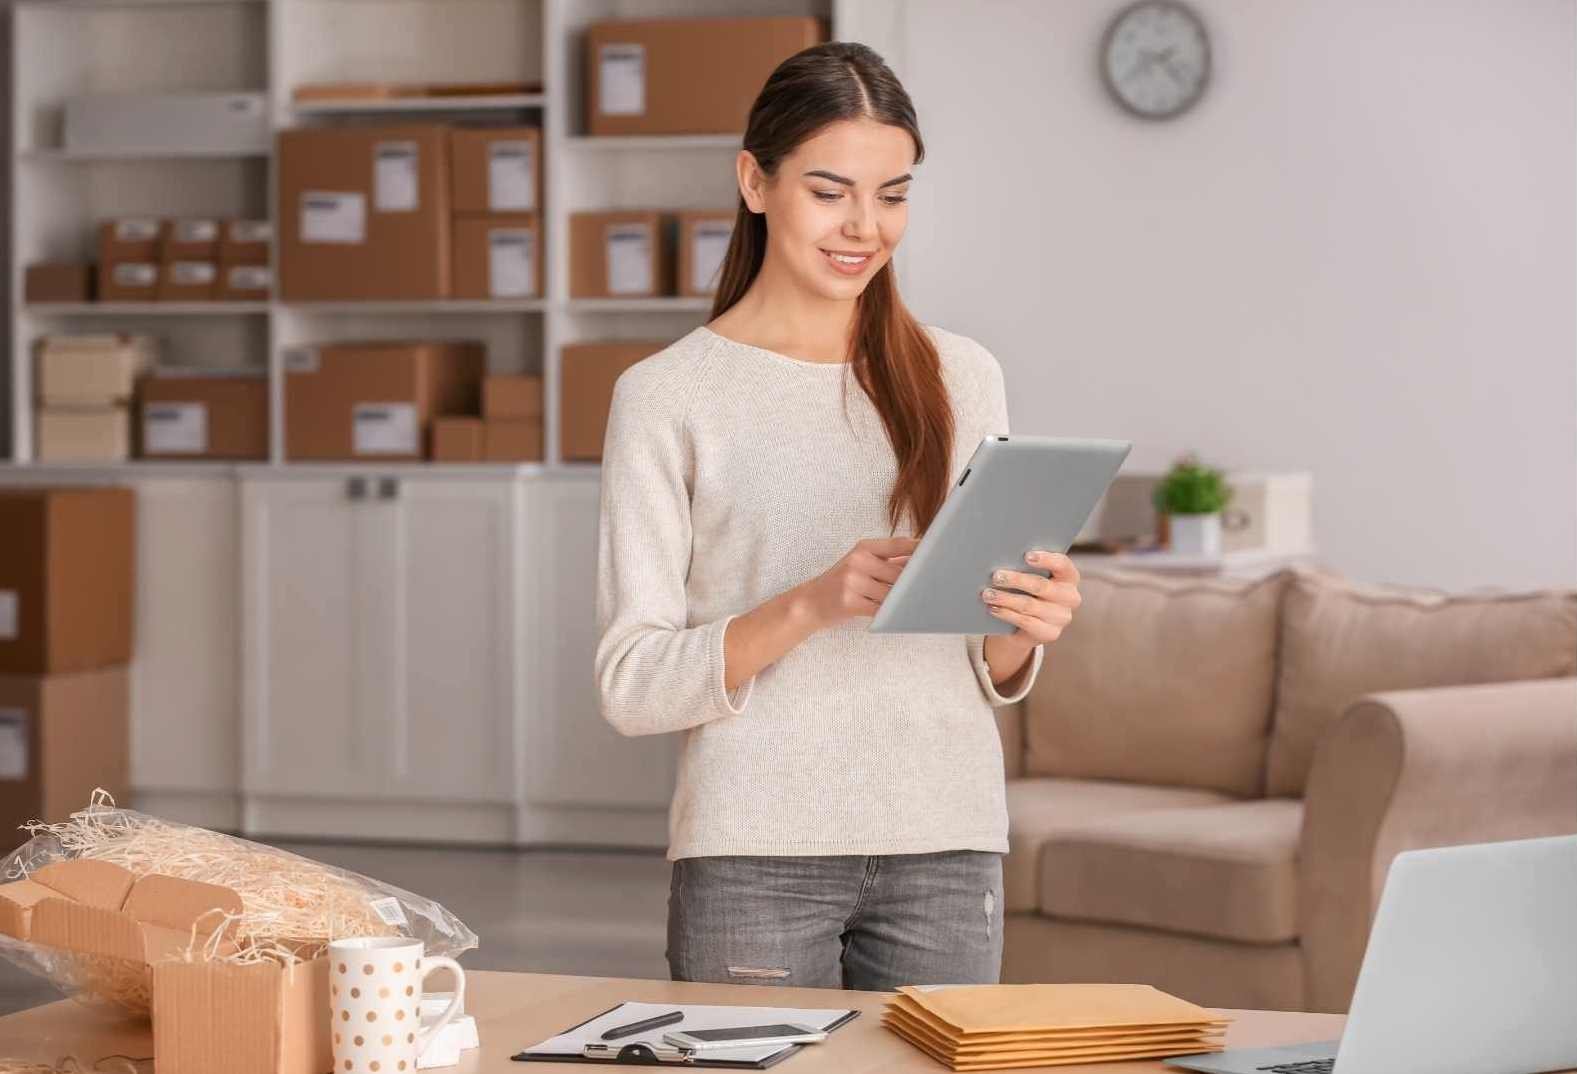 Young Woman with Tablet Preparing Parcel for Shipment to Client